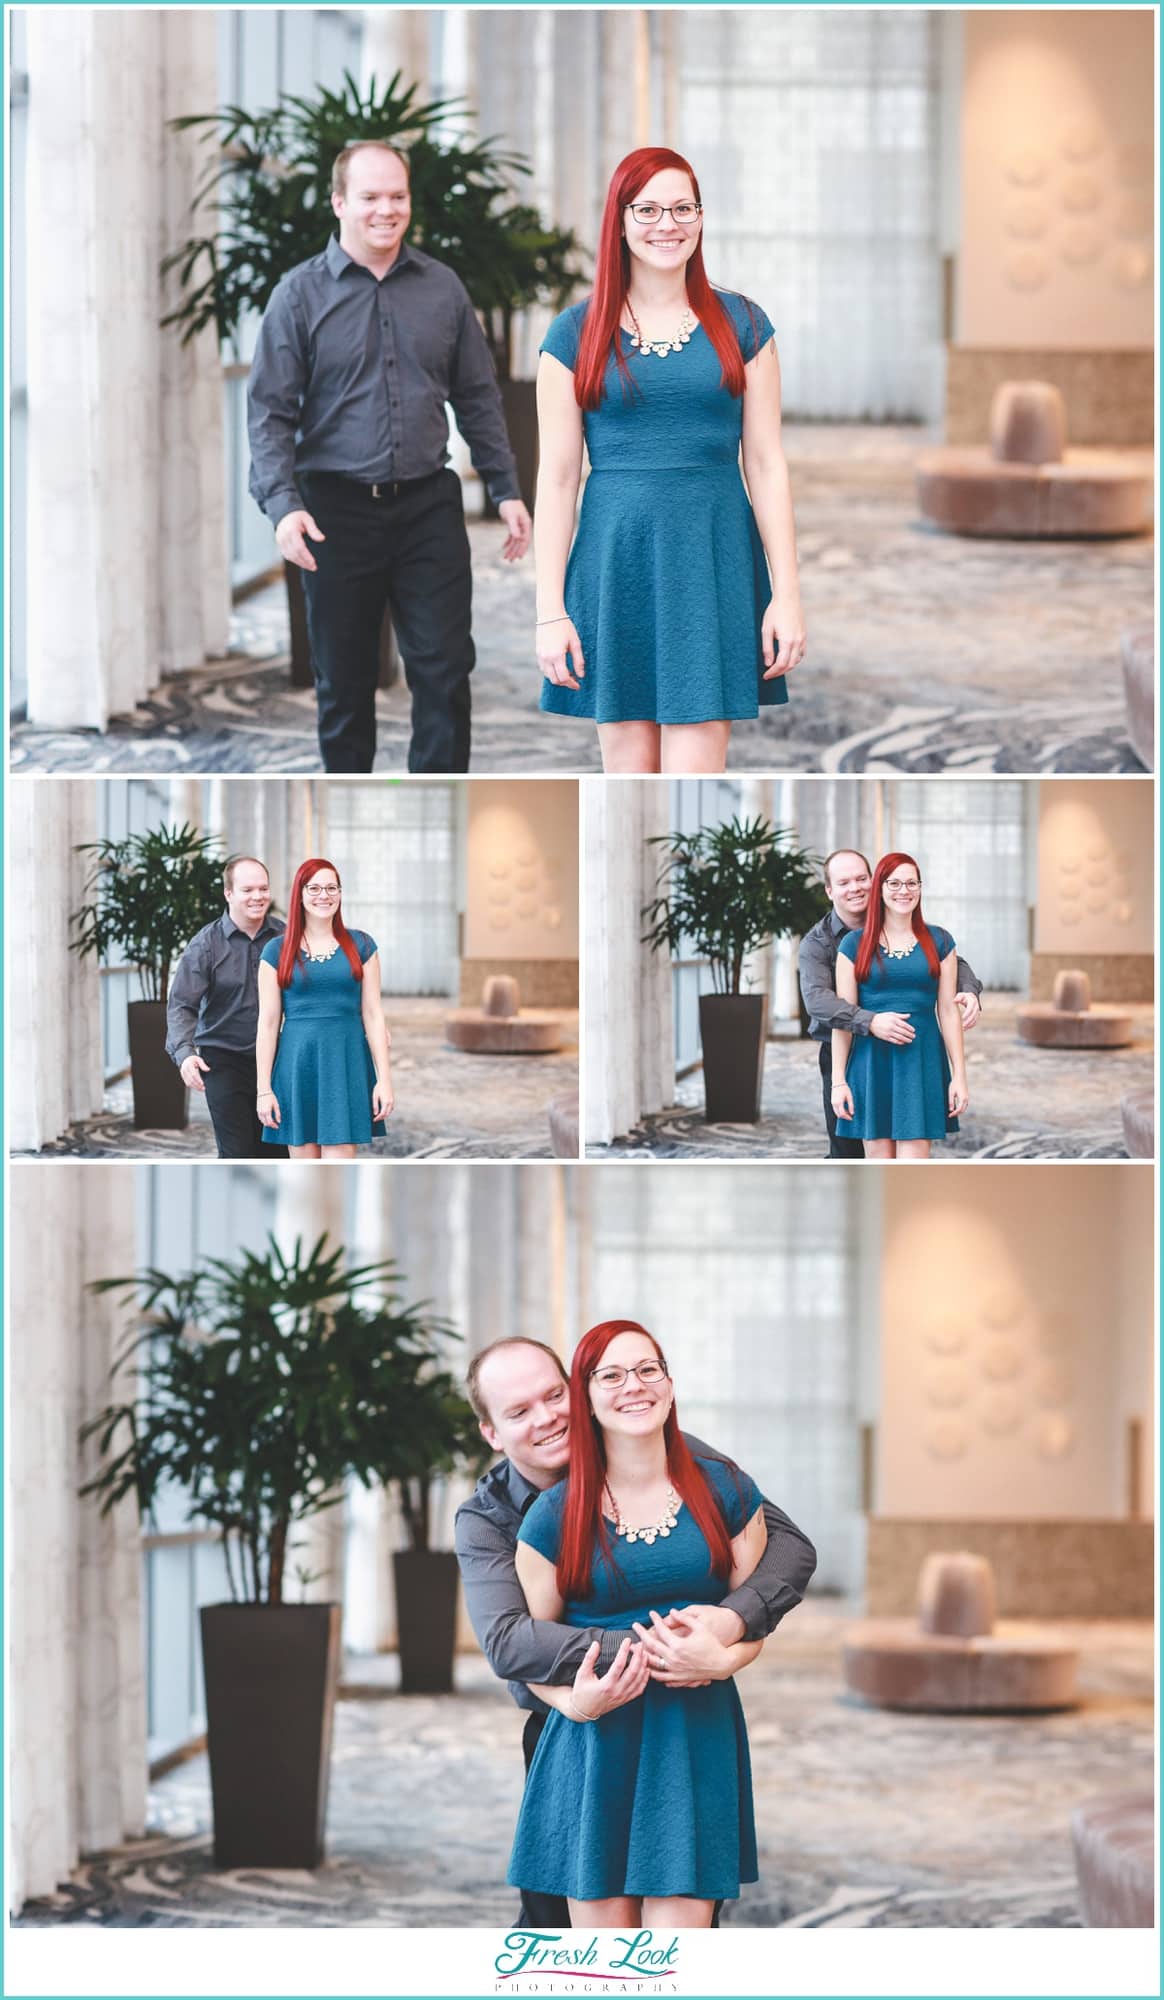 being silly during engagement photos